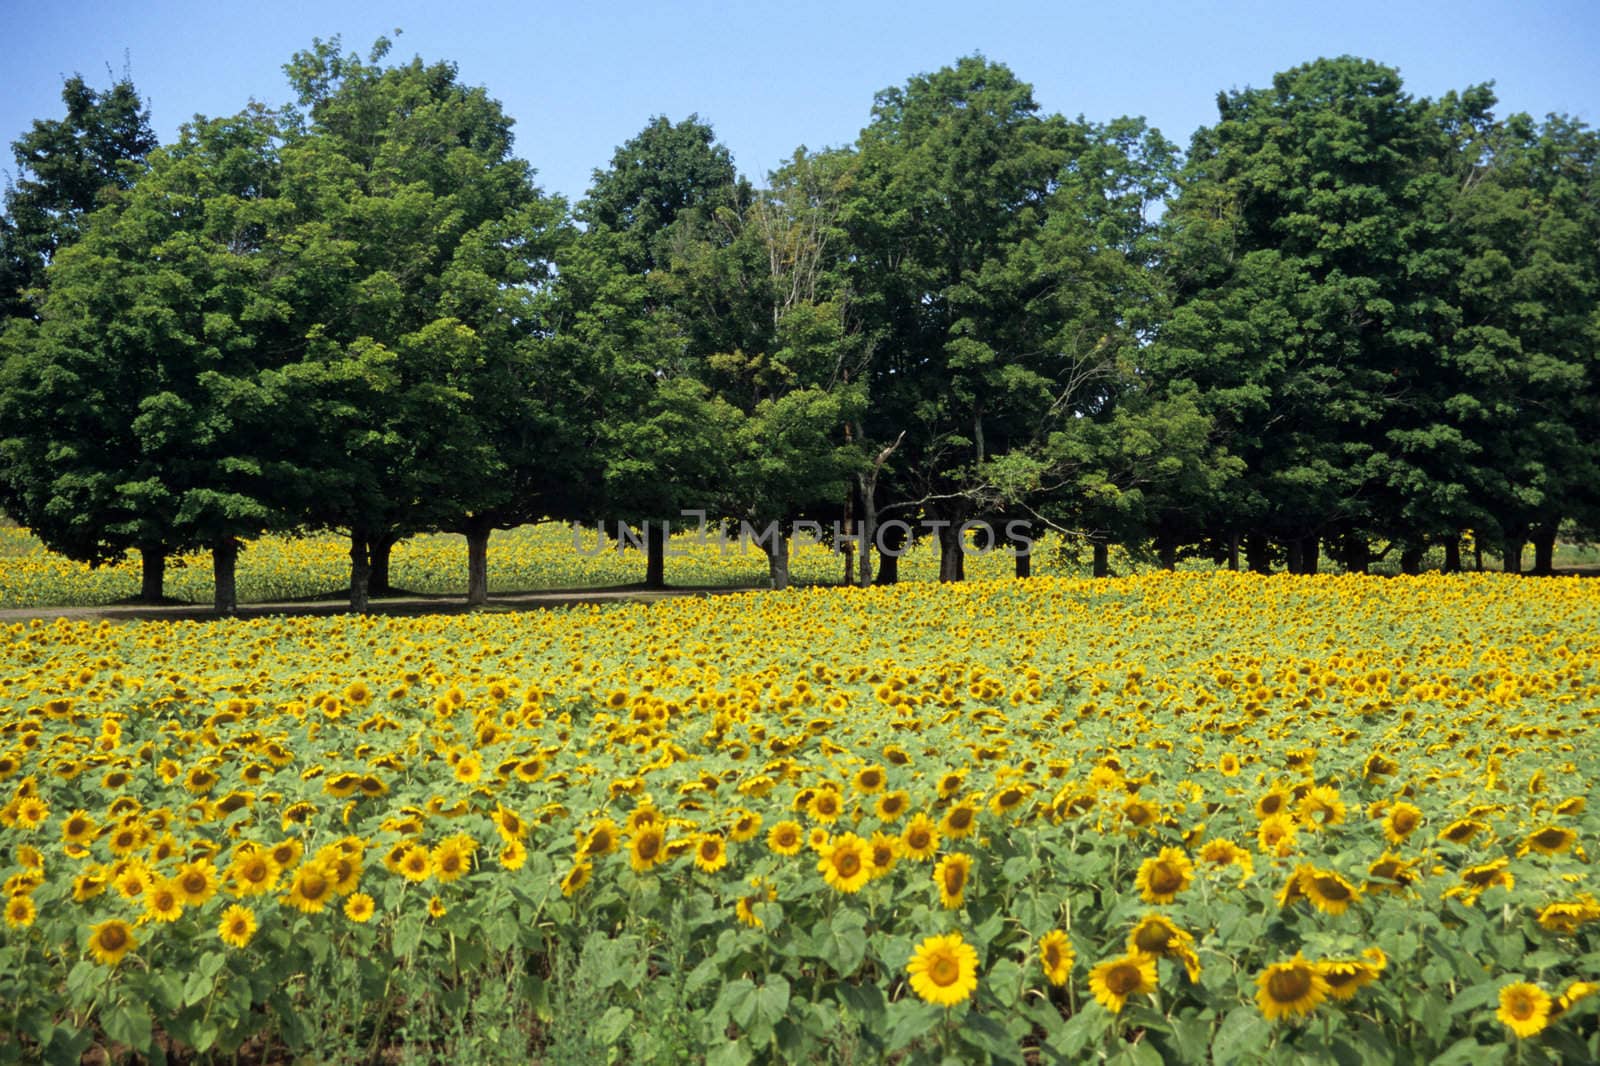 A field of Sunflowers with a border of trees in Nova Scotia, Canada.